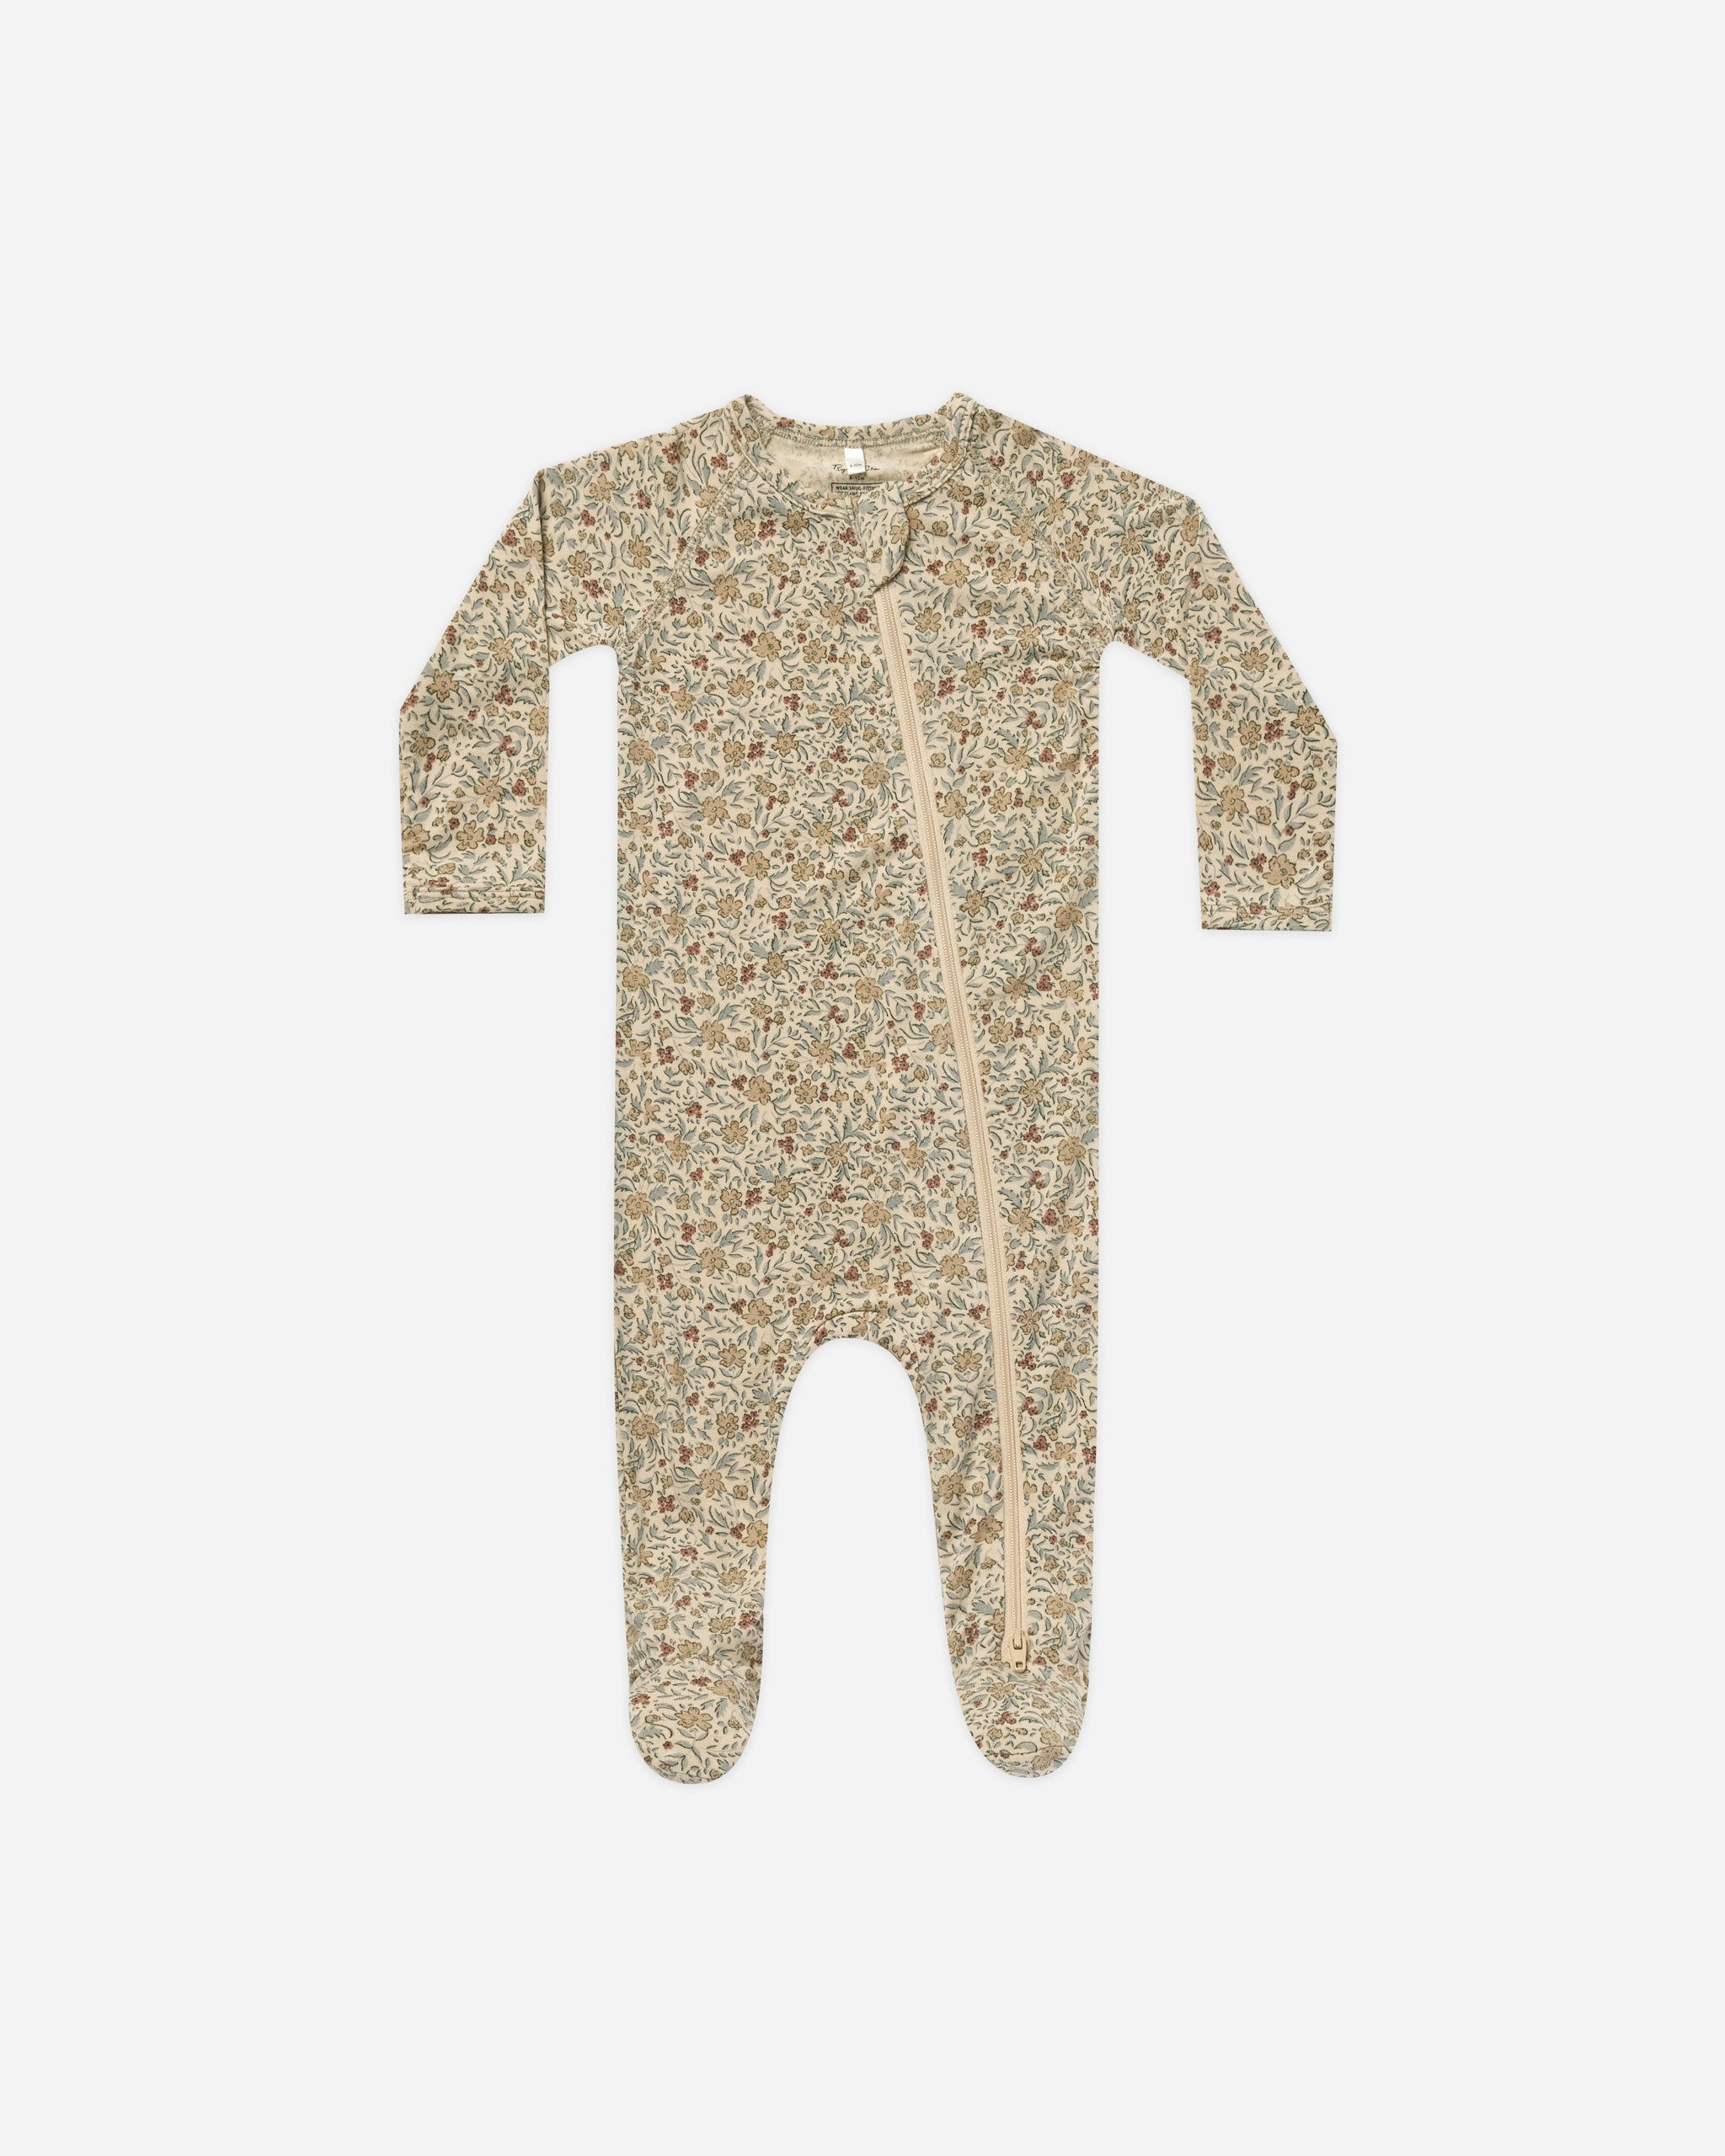 Modal Footie || Golden Garden - Rylee + Cru | Kids Clothes | Trendy Baby Clothes | Modern Infant Outfits |